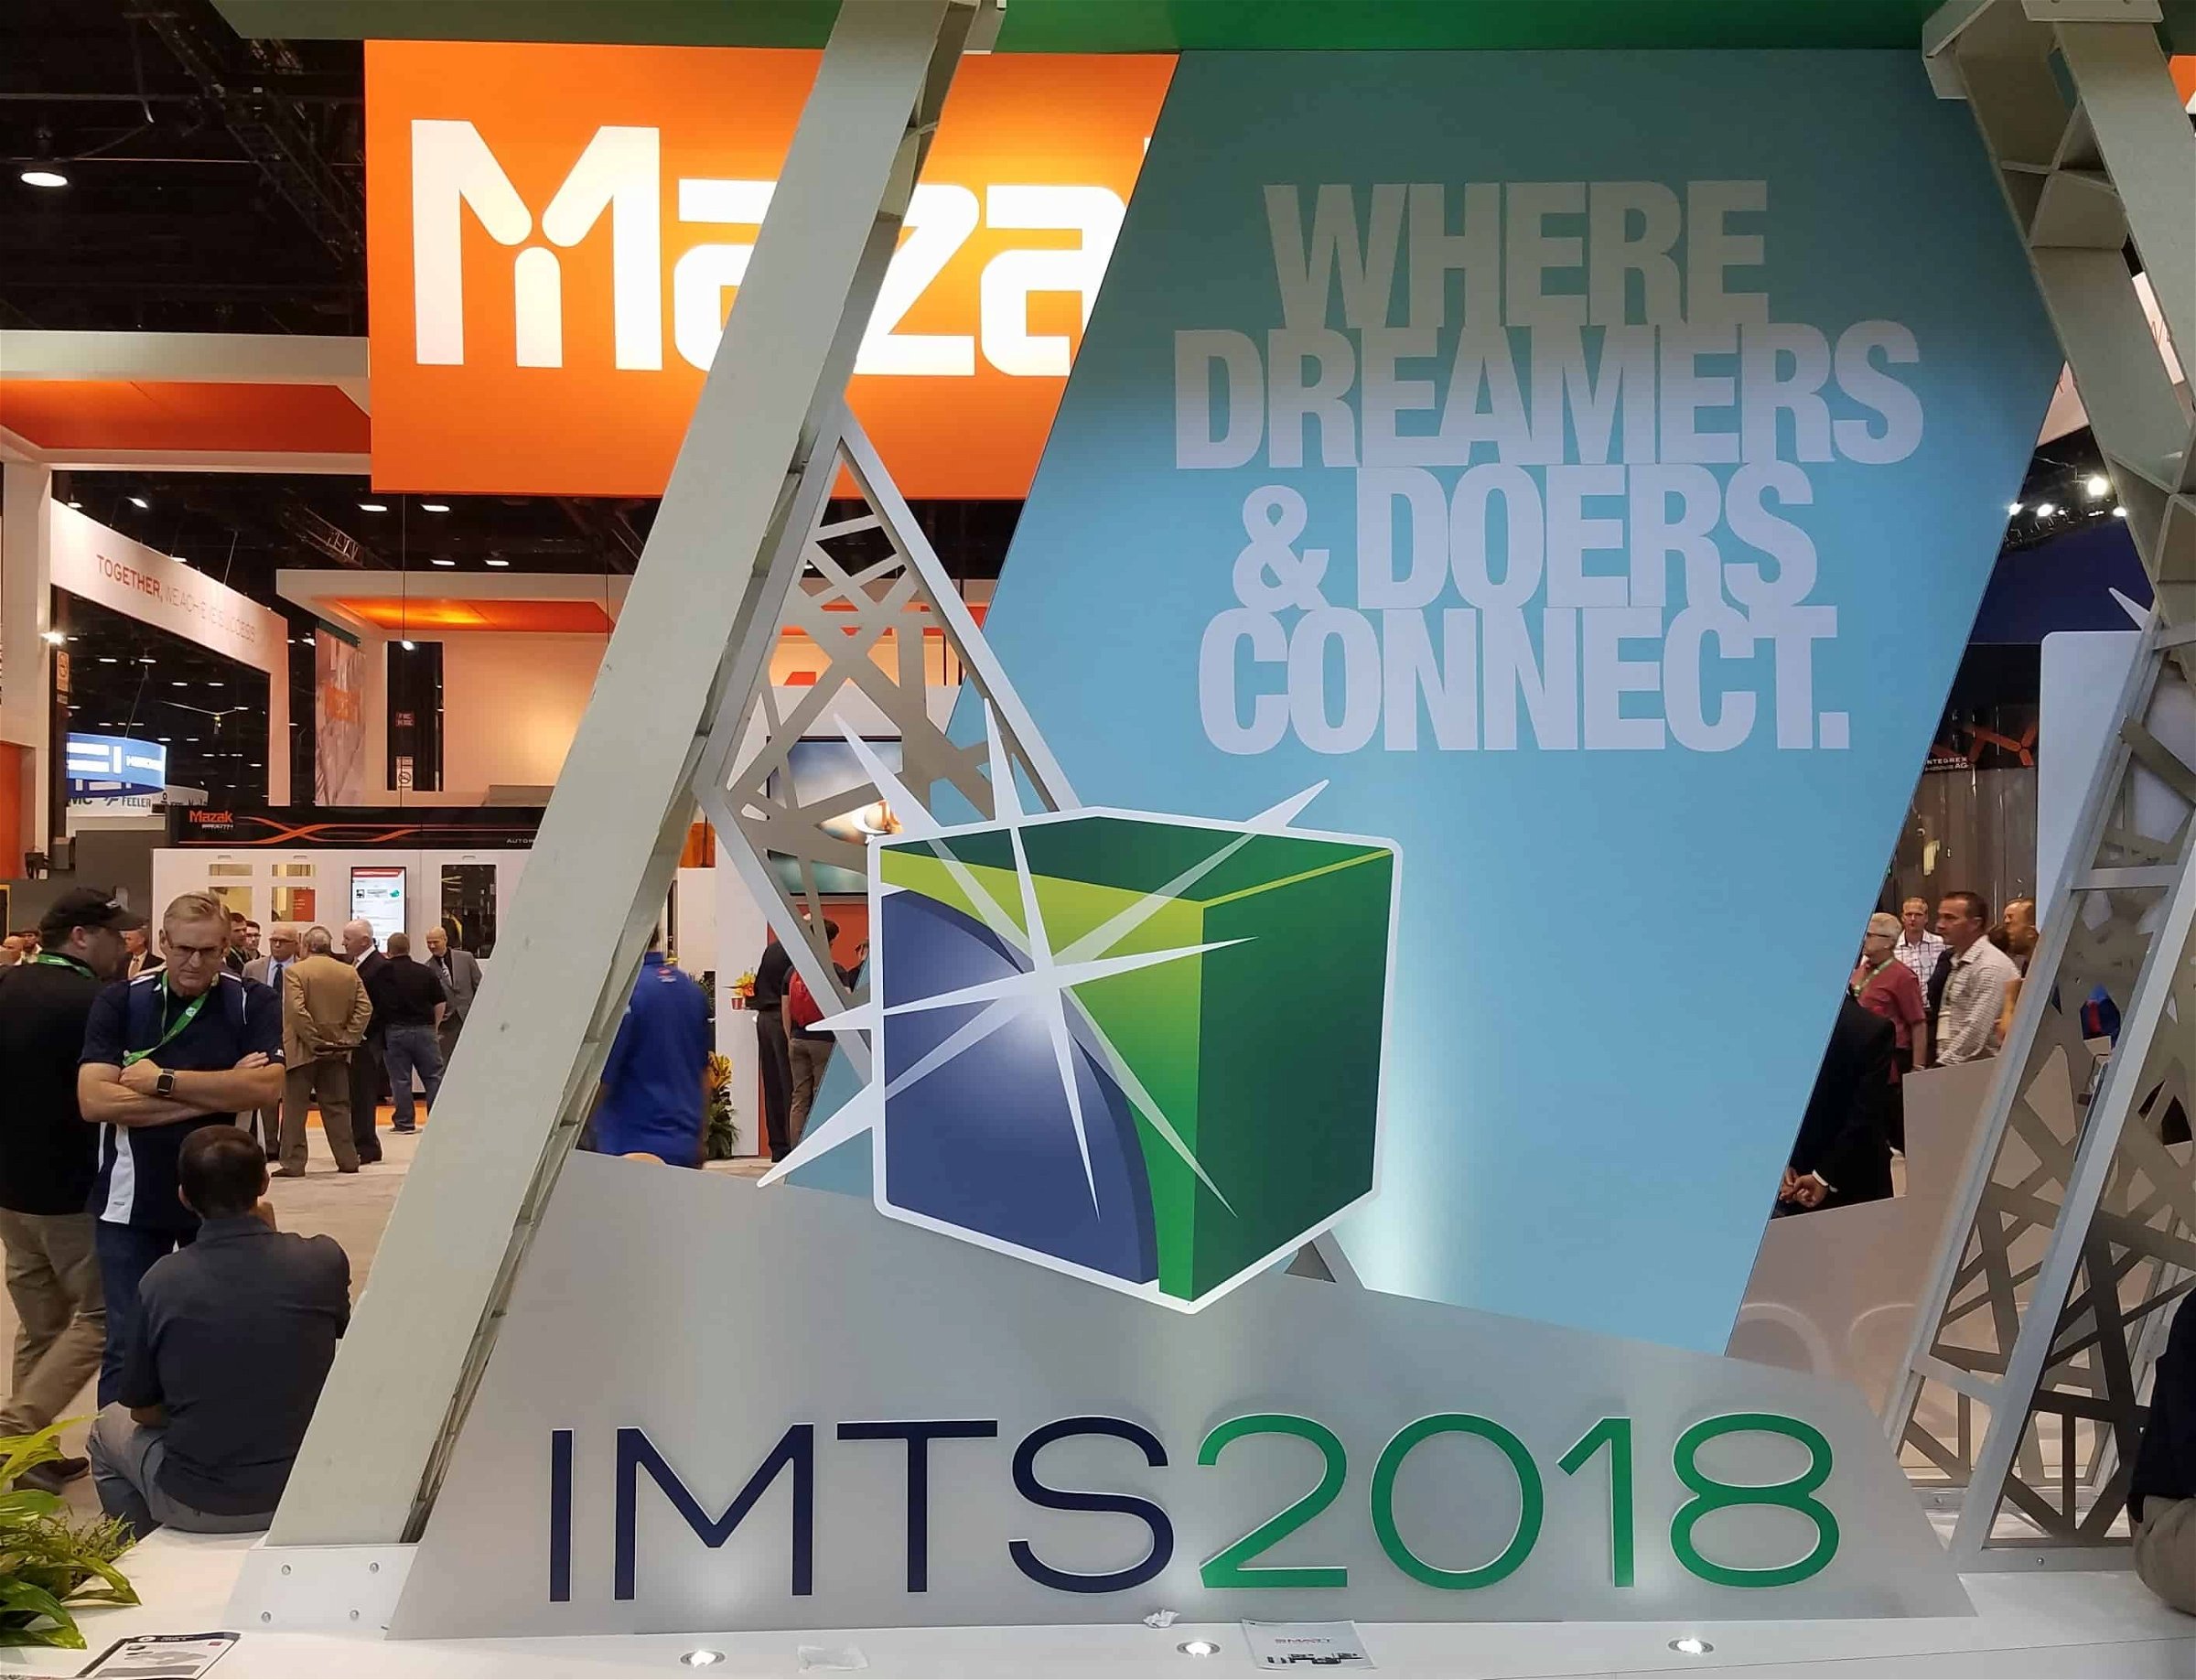 IMTS 2018 Dreamers and Doers